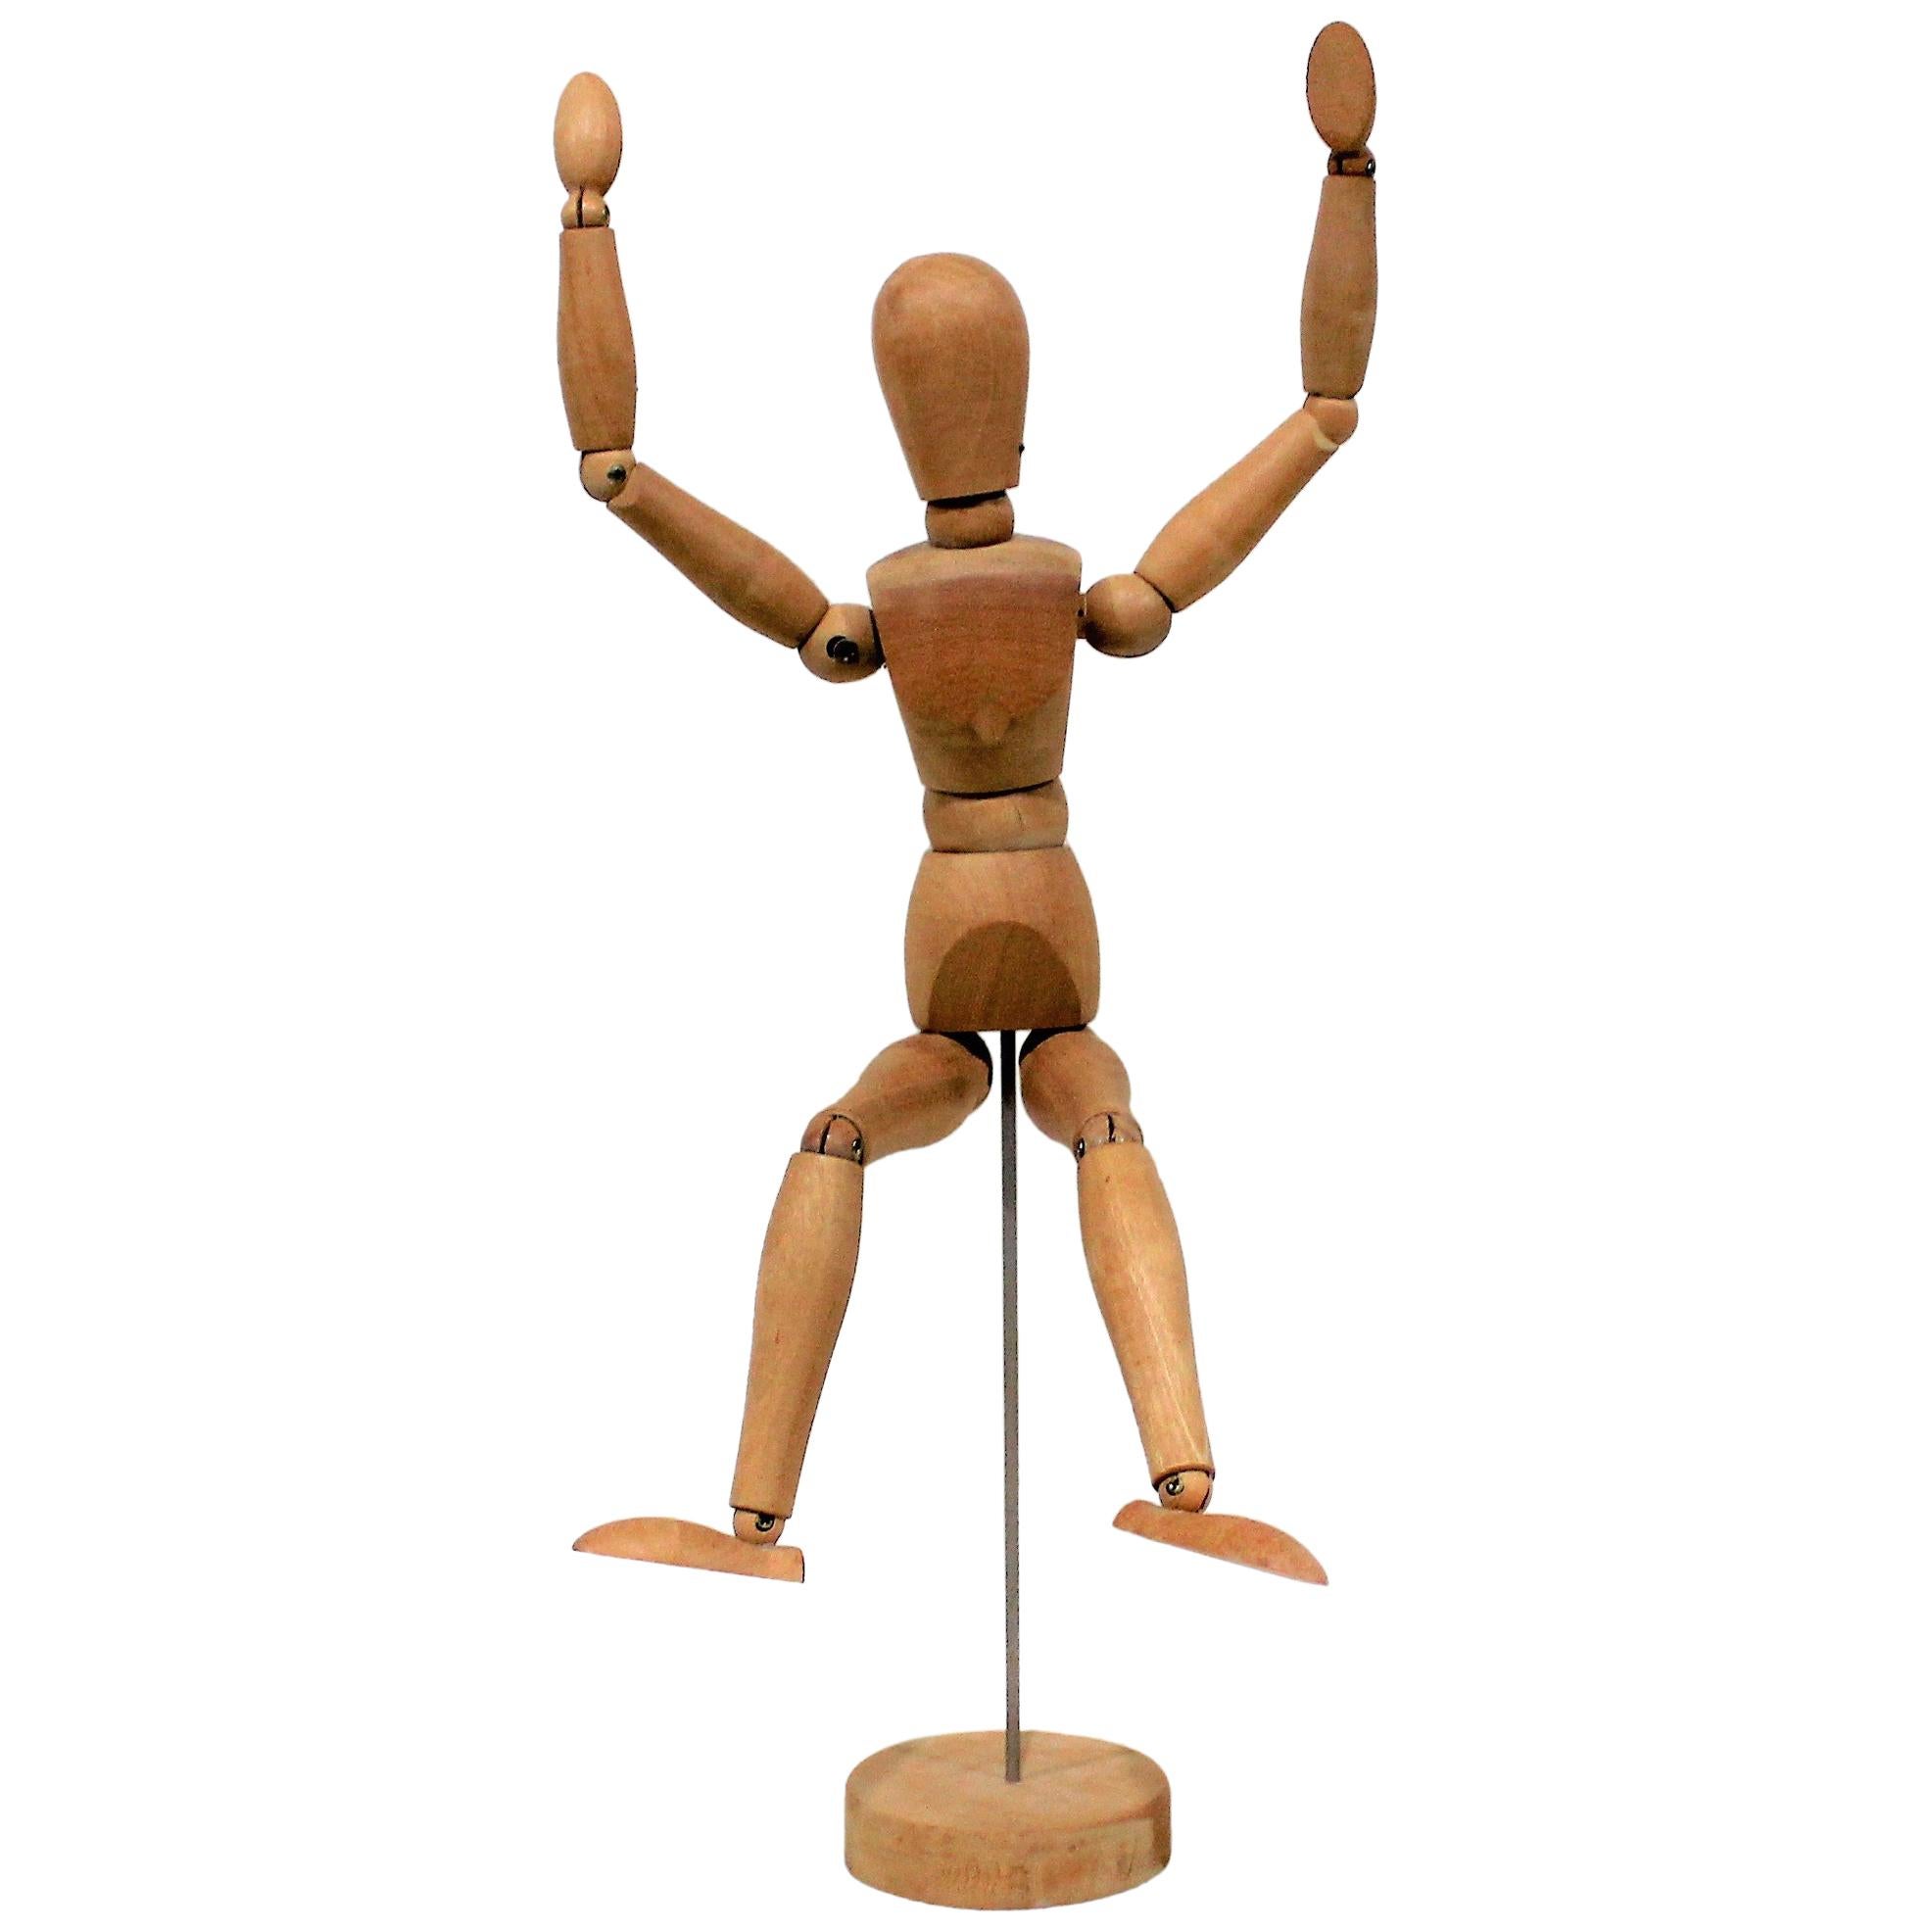 Vintage Articulated and Jointed Wooden Metal Figure